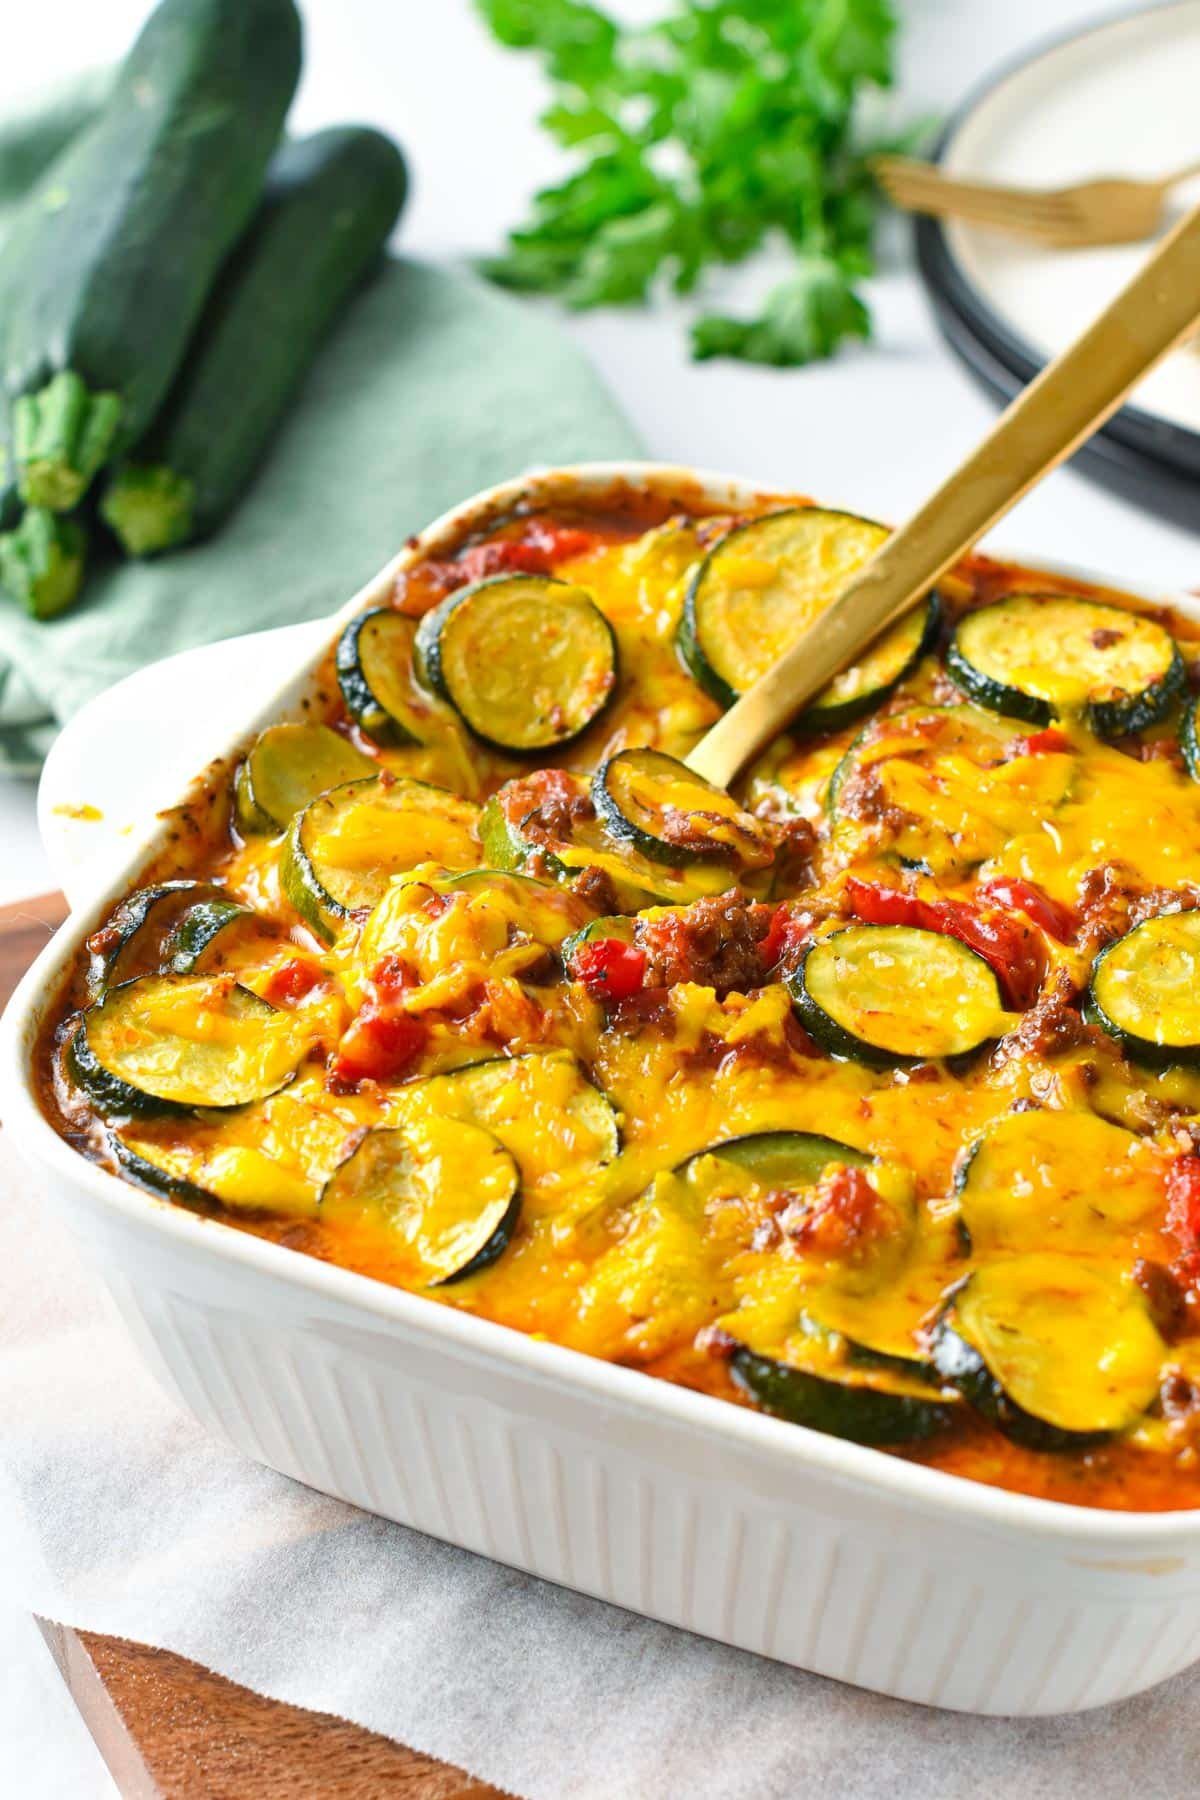 This Zucchini Sausage Casserole is an easy and healthy family dinner to use for your summer zucchini. Delicious crunchy zucchini slices, cooked in a homemade tomato sauce with tasty pieces of ground sausage.